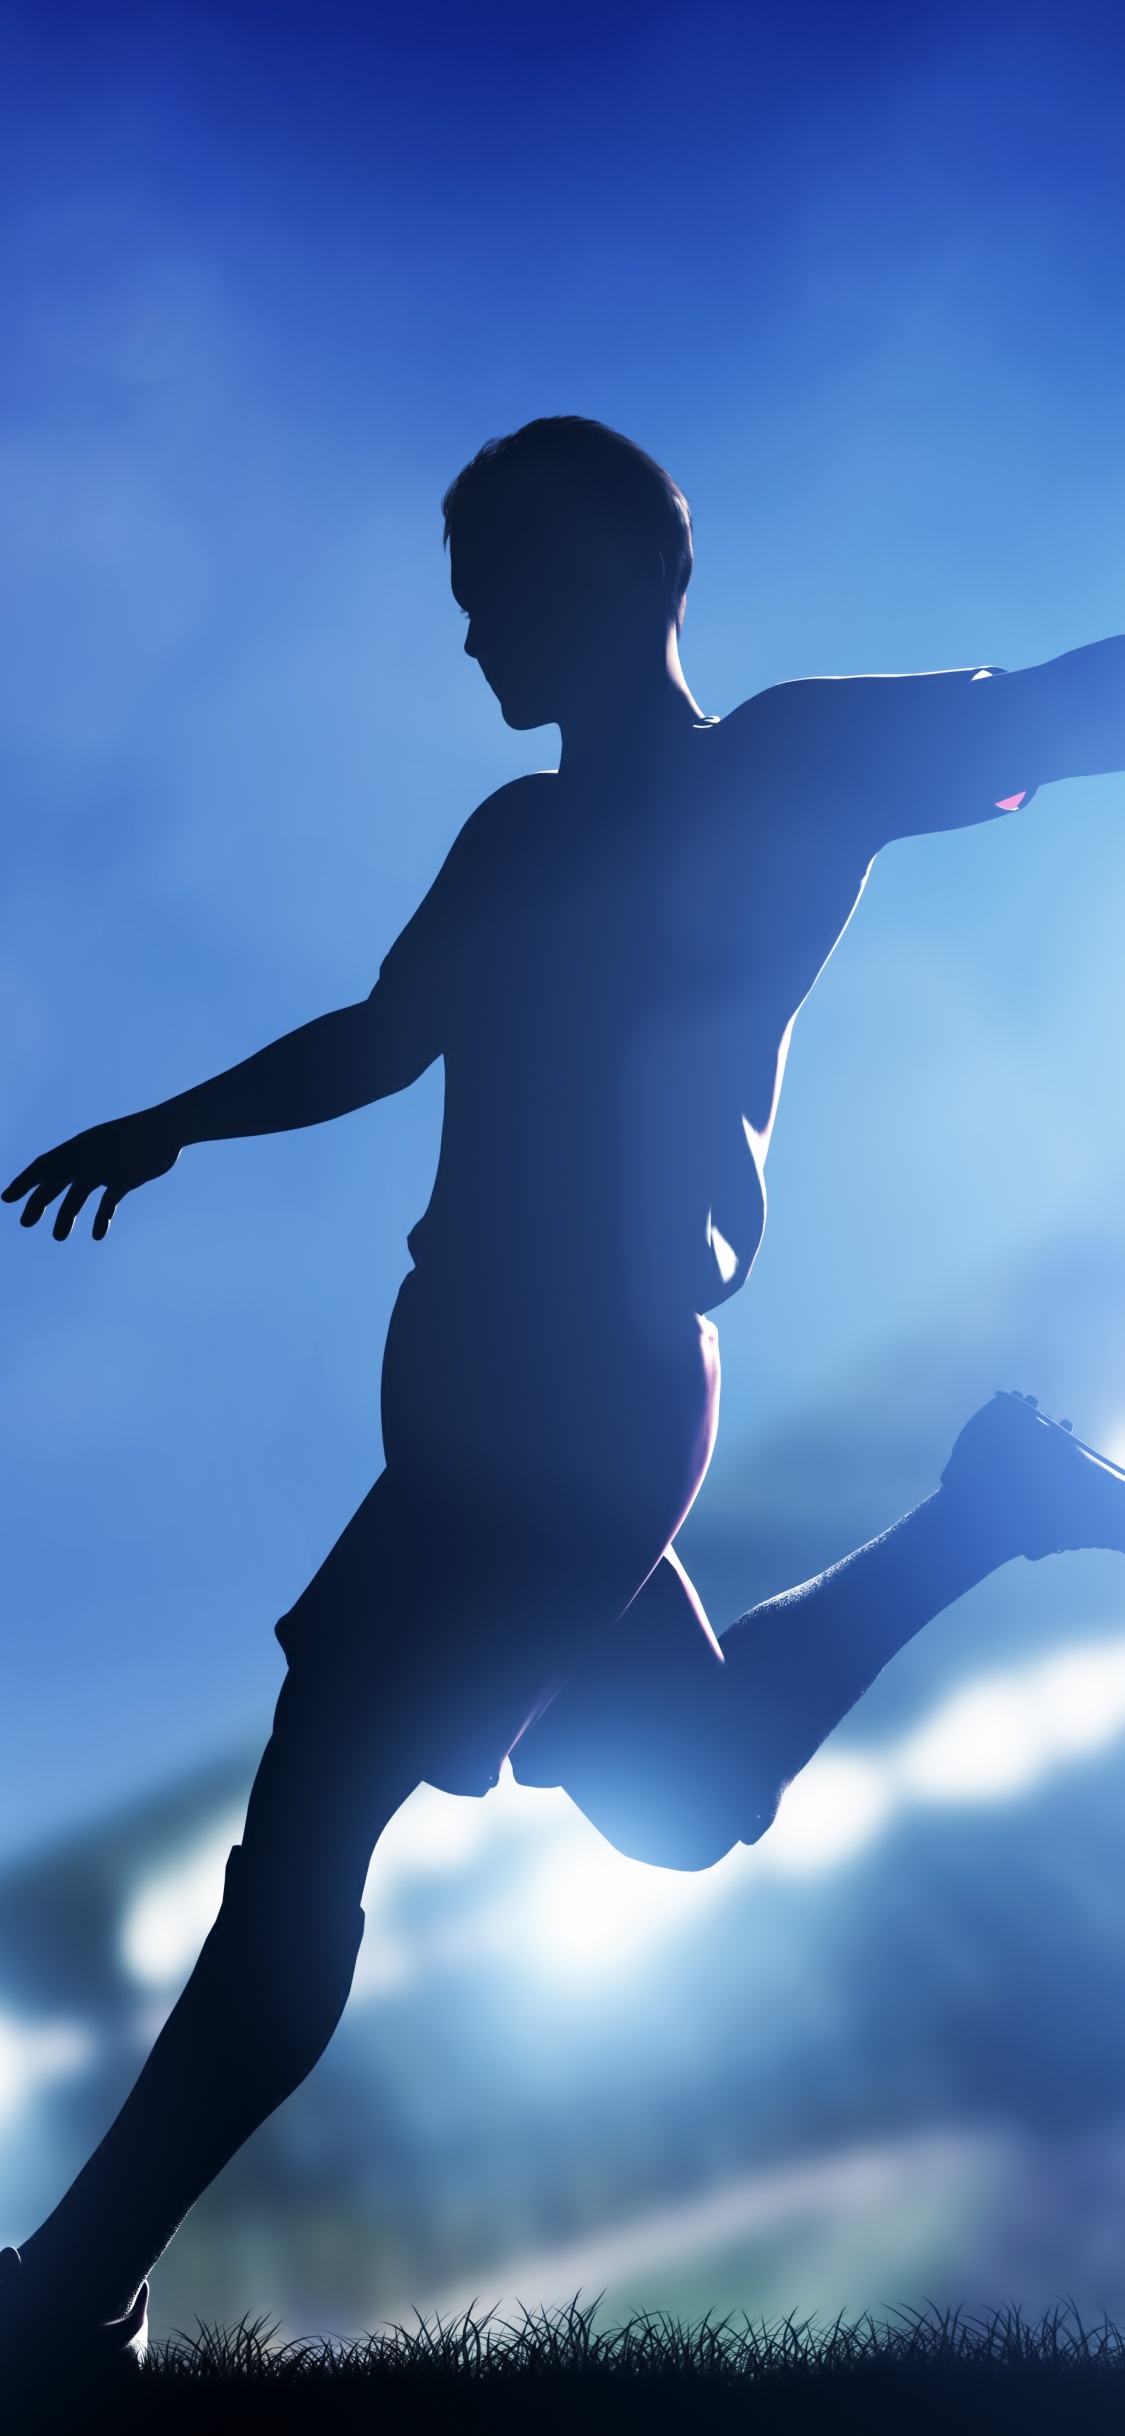 Man in Black Shorts Playing Soccer Ball. Wallpaper in 1125x2436 Resolution